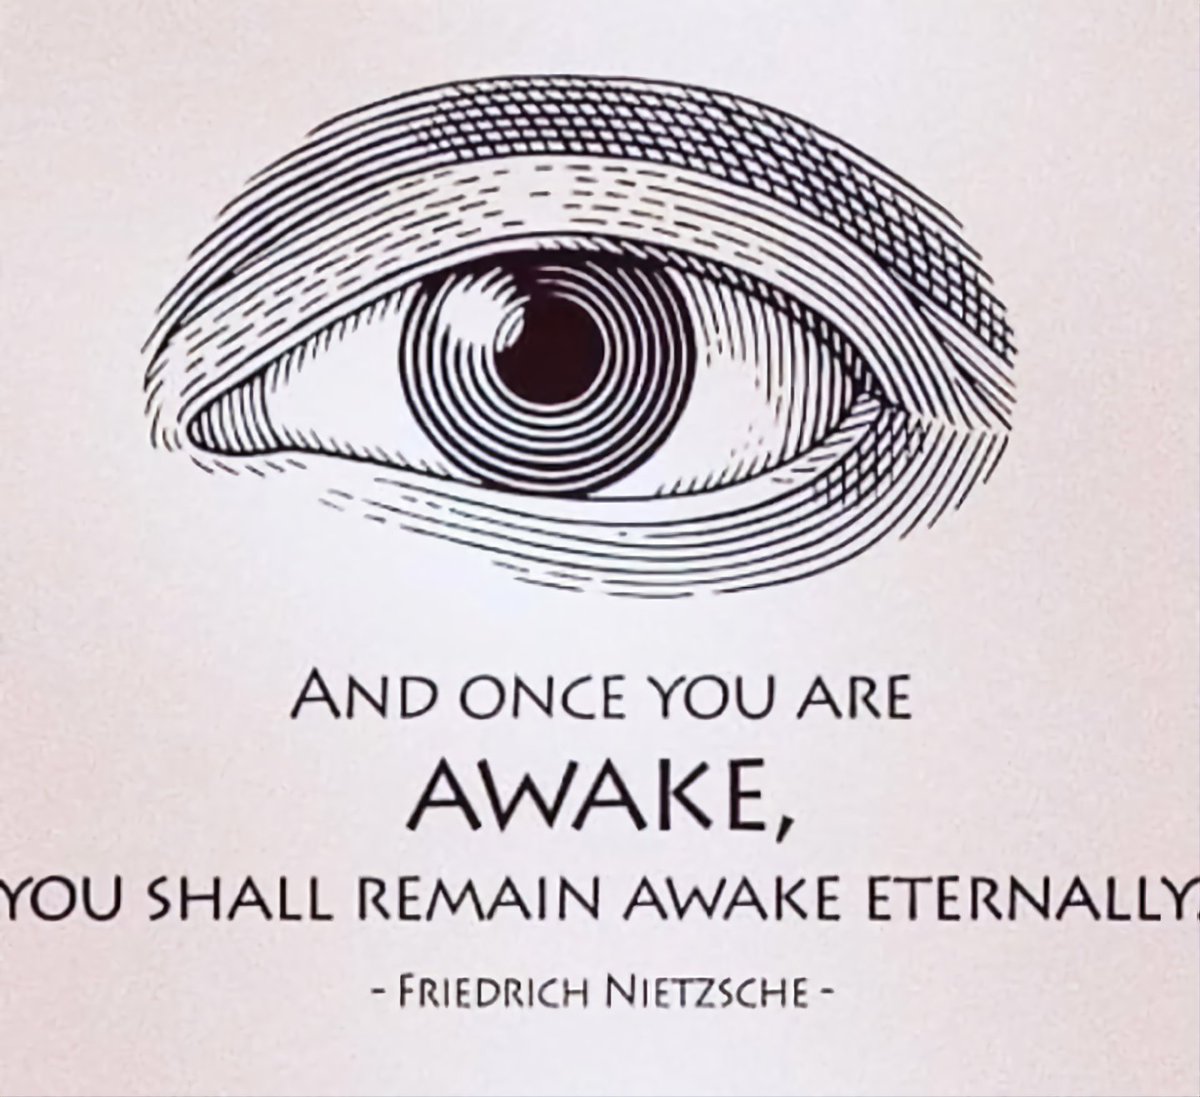 AND ONCE YOU ARE AWAKE, YOU SHALL REMAIN AWAKE ETERNALLY. -FRIEDRICH NIETZSCHE